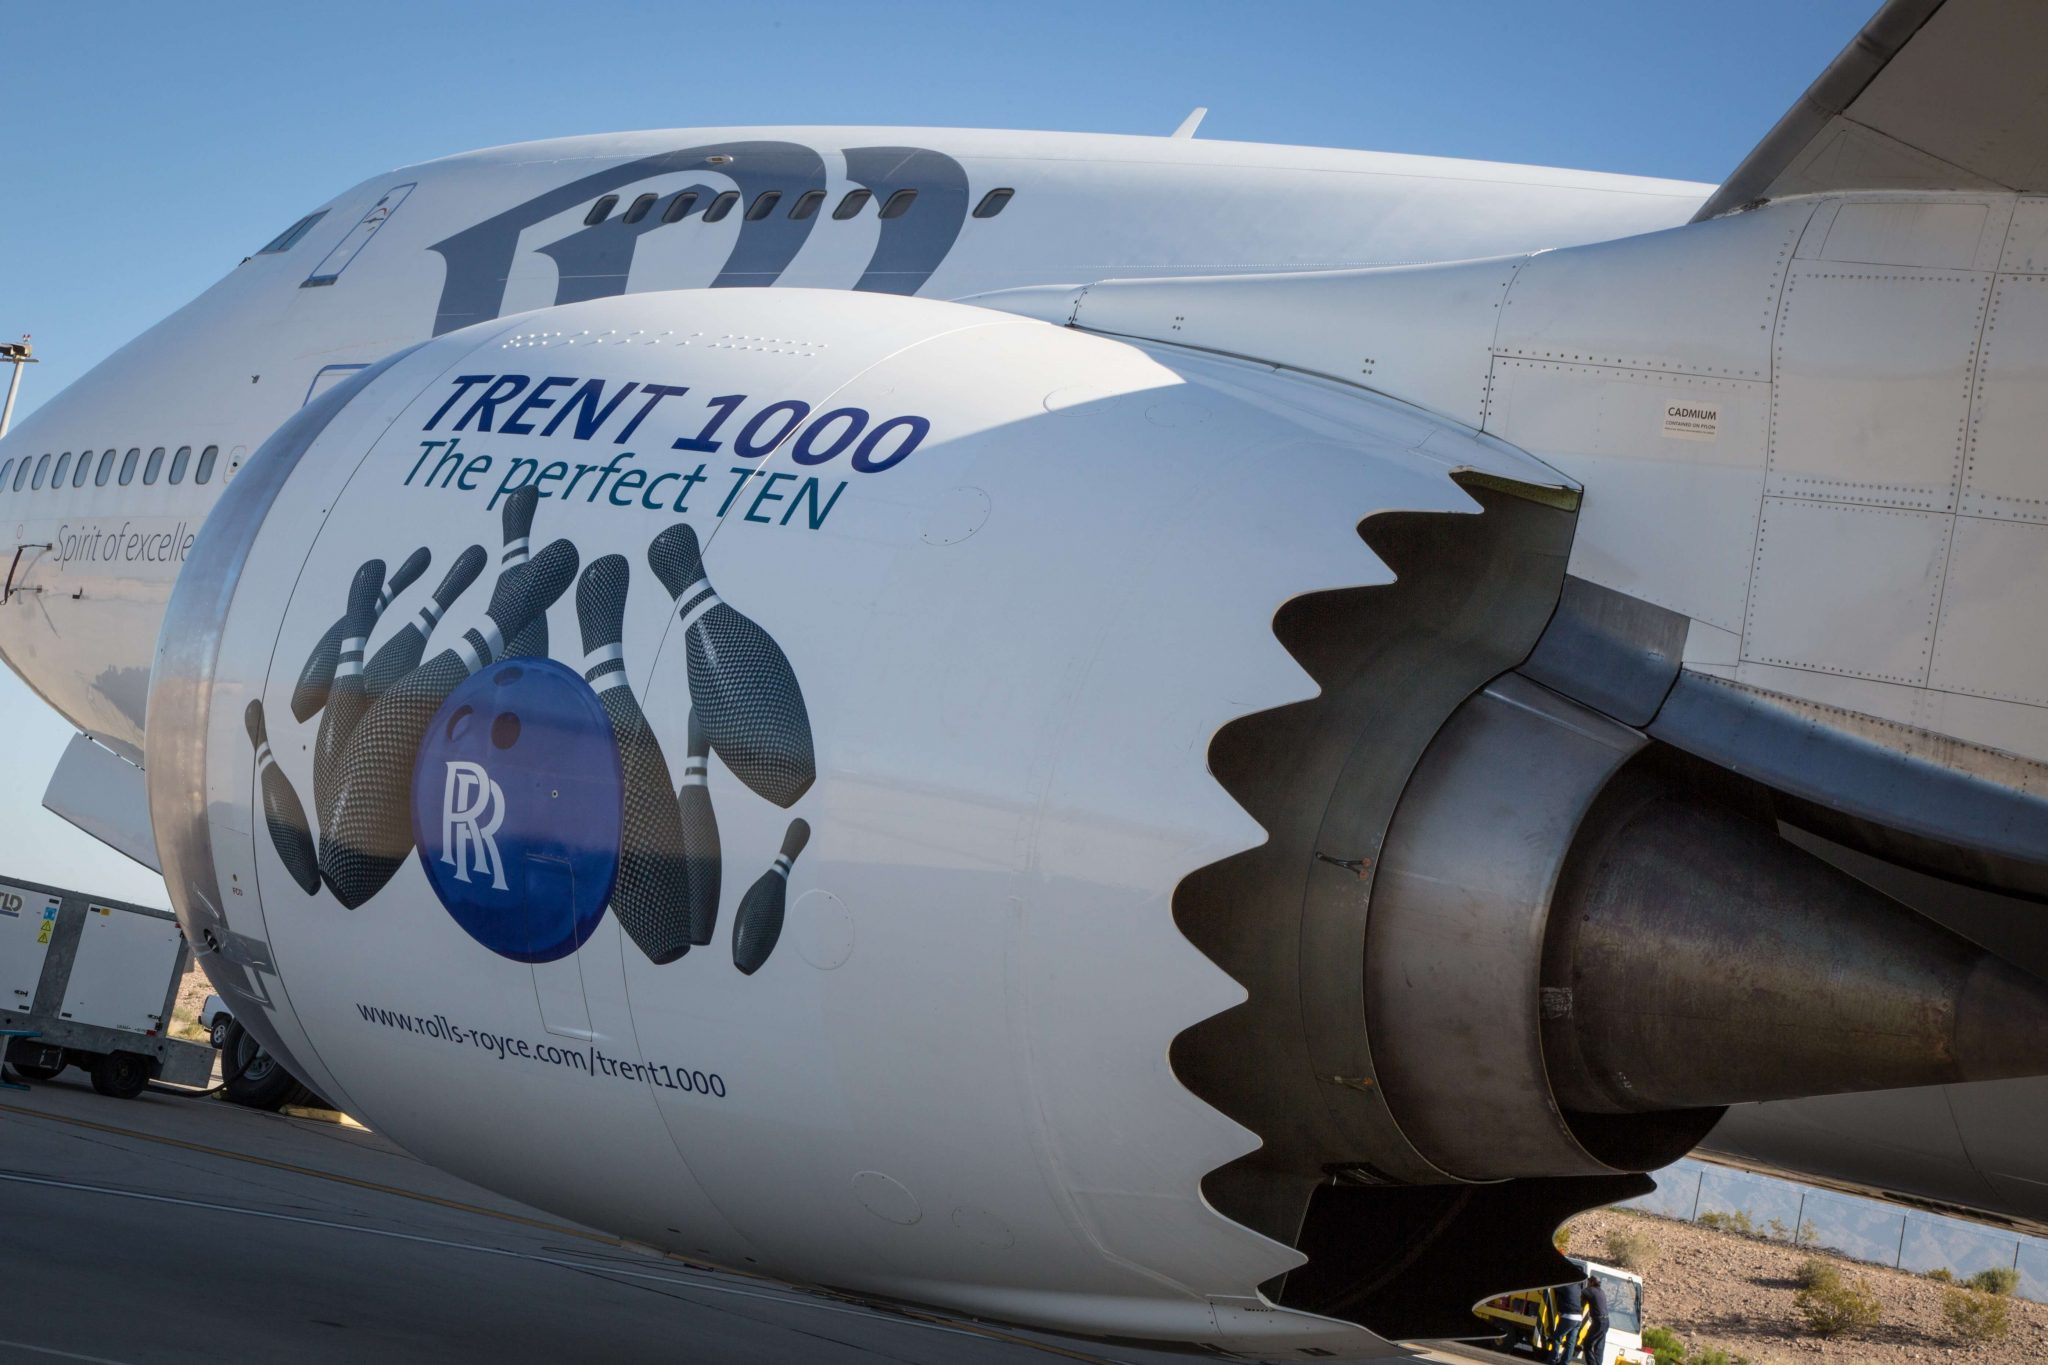 Trent 1000 inspections causes ANA to cancel domestic flights